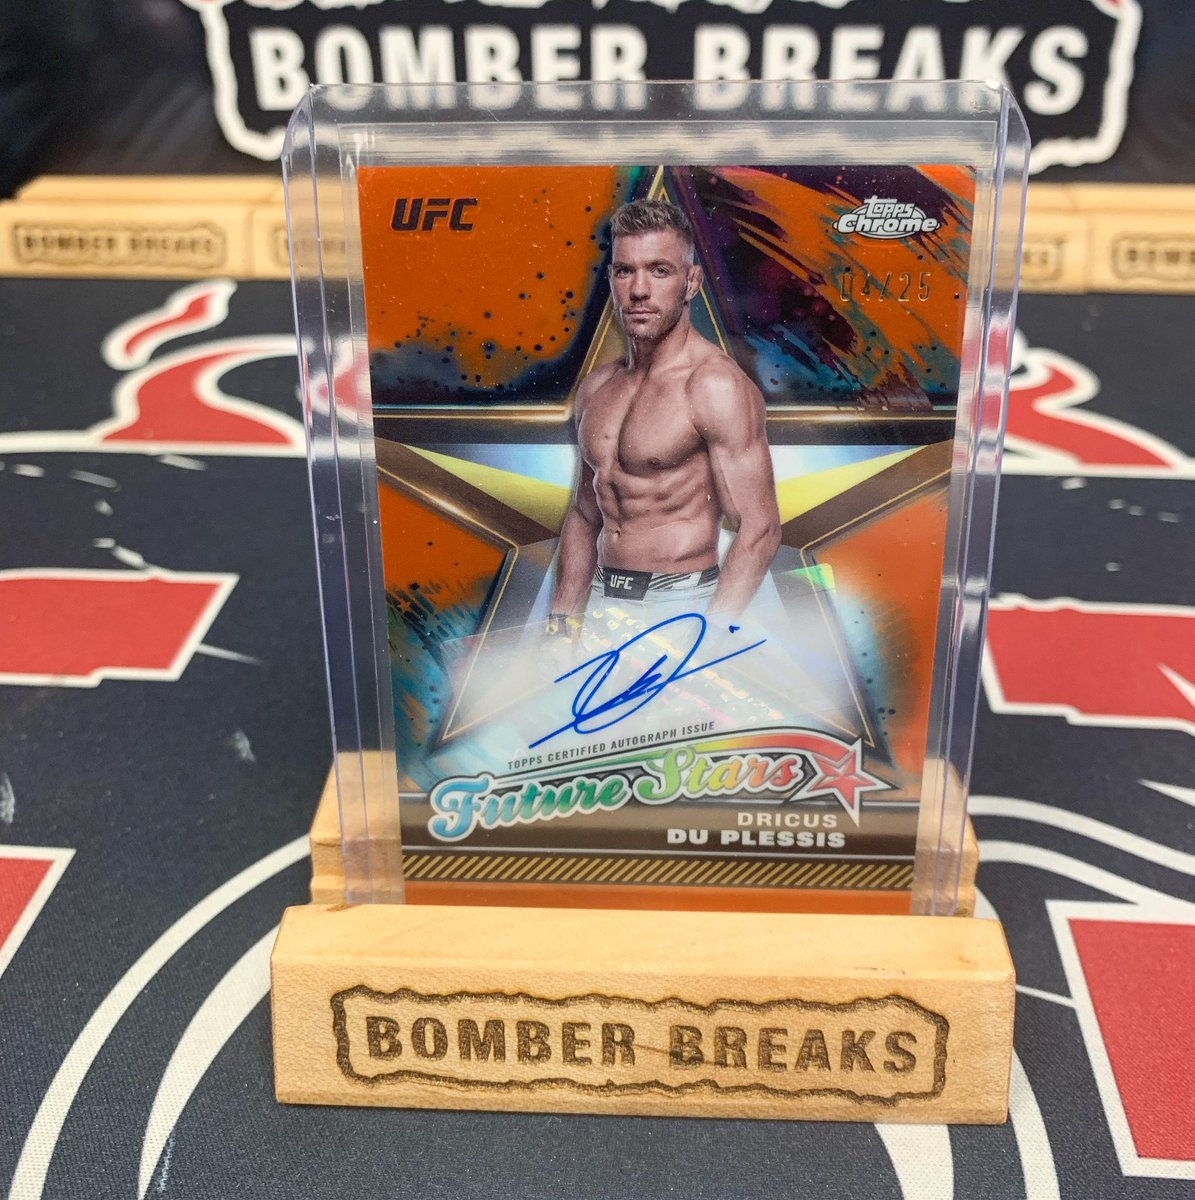 The Current UFC Middleweight Champ - Dricus du Plessis Orange Refractor Auto /25 🔥🔥 @dricusduplessis @topps @fanatics 
#ufc #mma #toppschrome #dricusduplessis #thehobby #groupbreaks #boxbreaks #autograph #casebreaks #collect #tradingcards